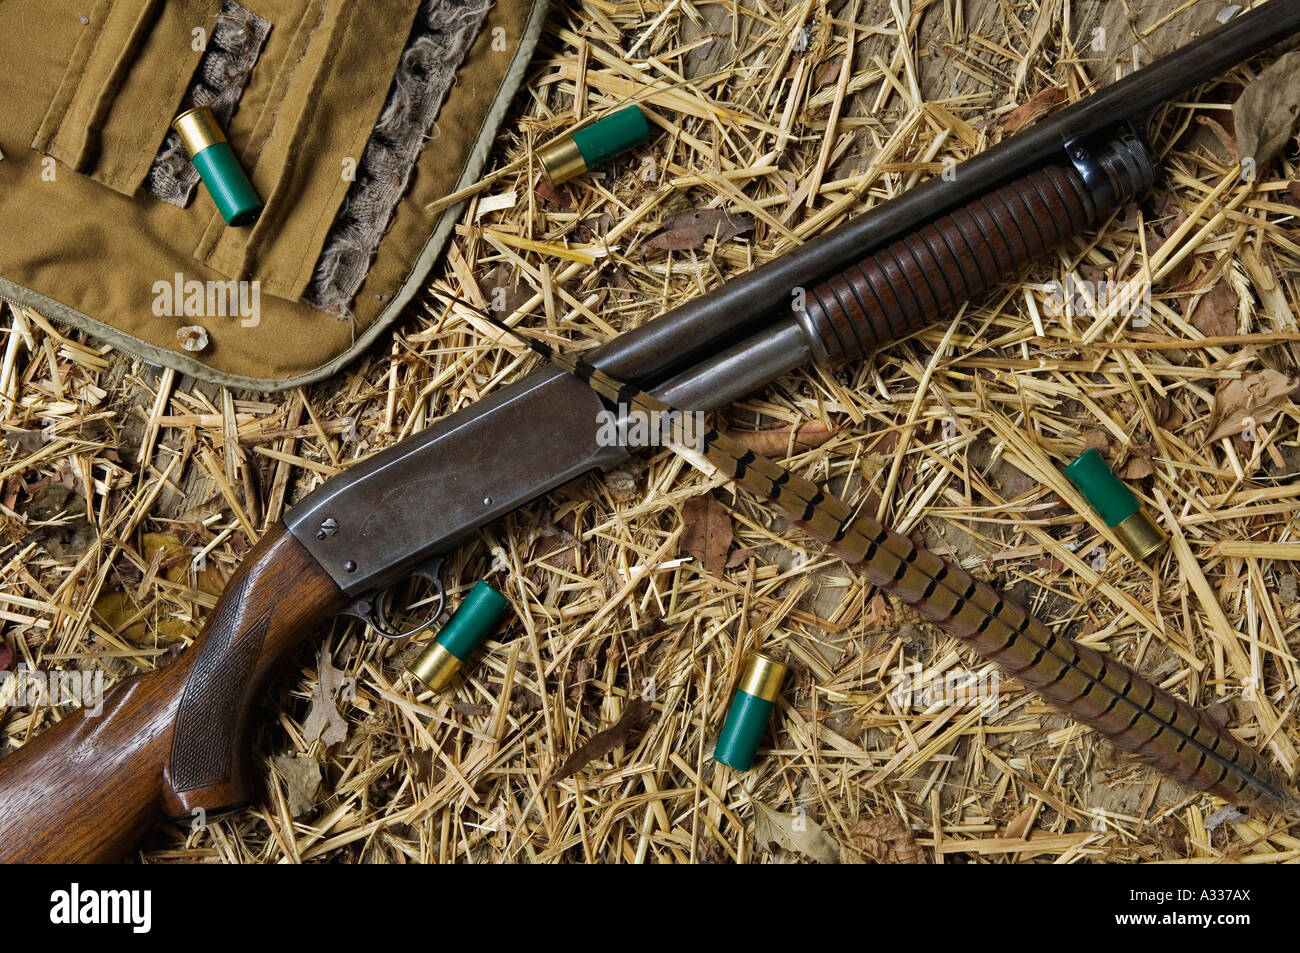 Old Ithaca Model 37 Featherweight 12 Gauge Pump Shotgun Laying on Wooden Straw Covered Floor along with Pheasant Tail Feather Ca Stock Photo